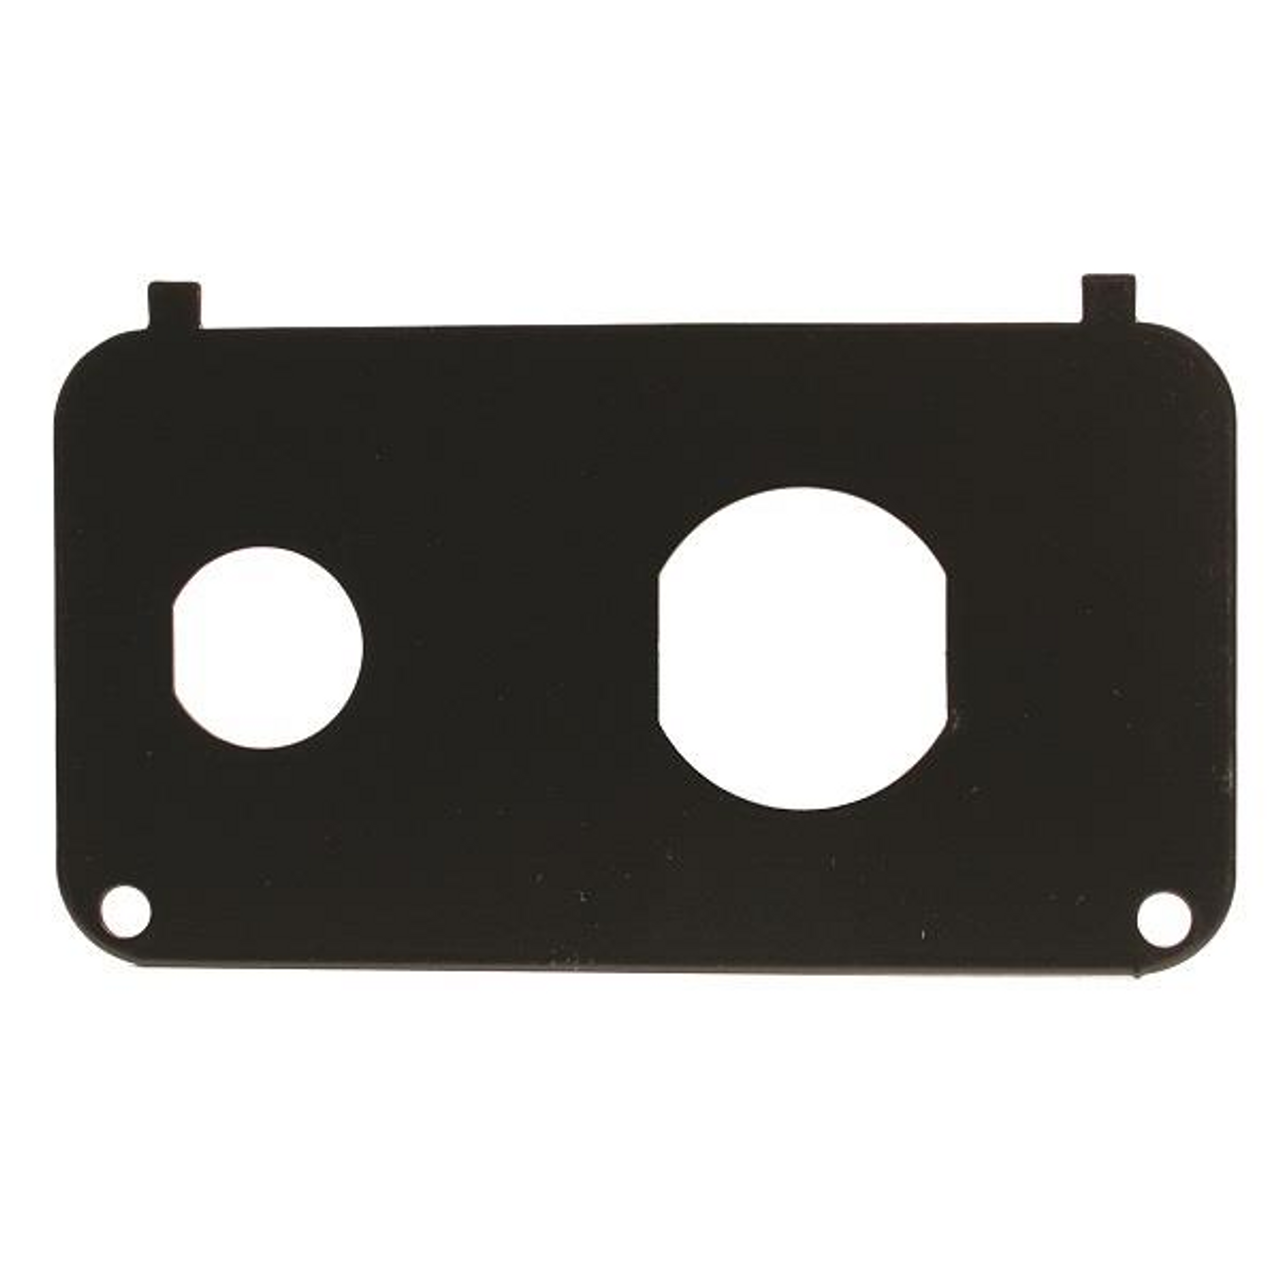 Mounting Plate For 12 VOLTAB & Key, 31746